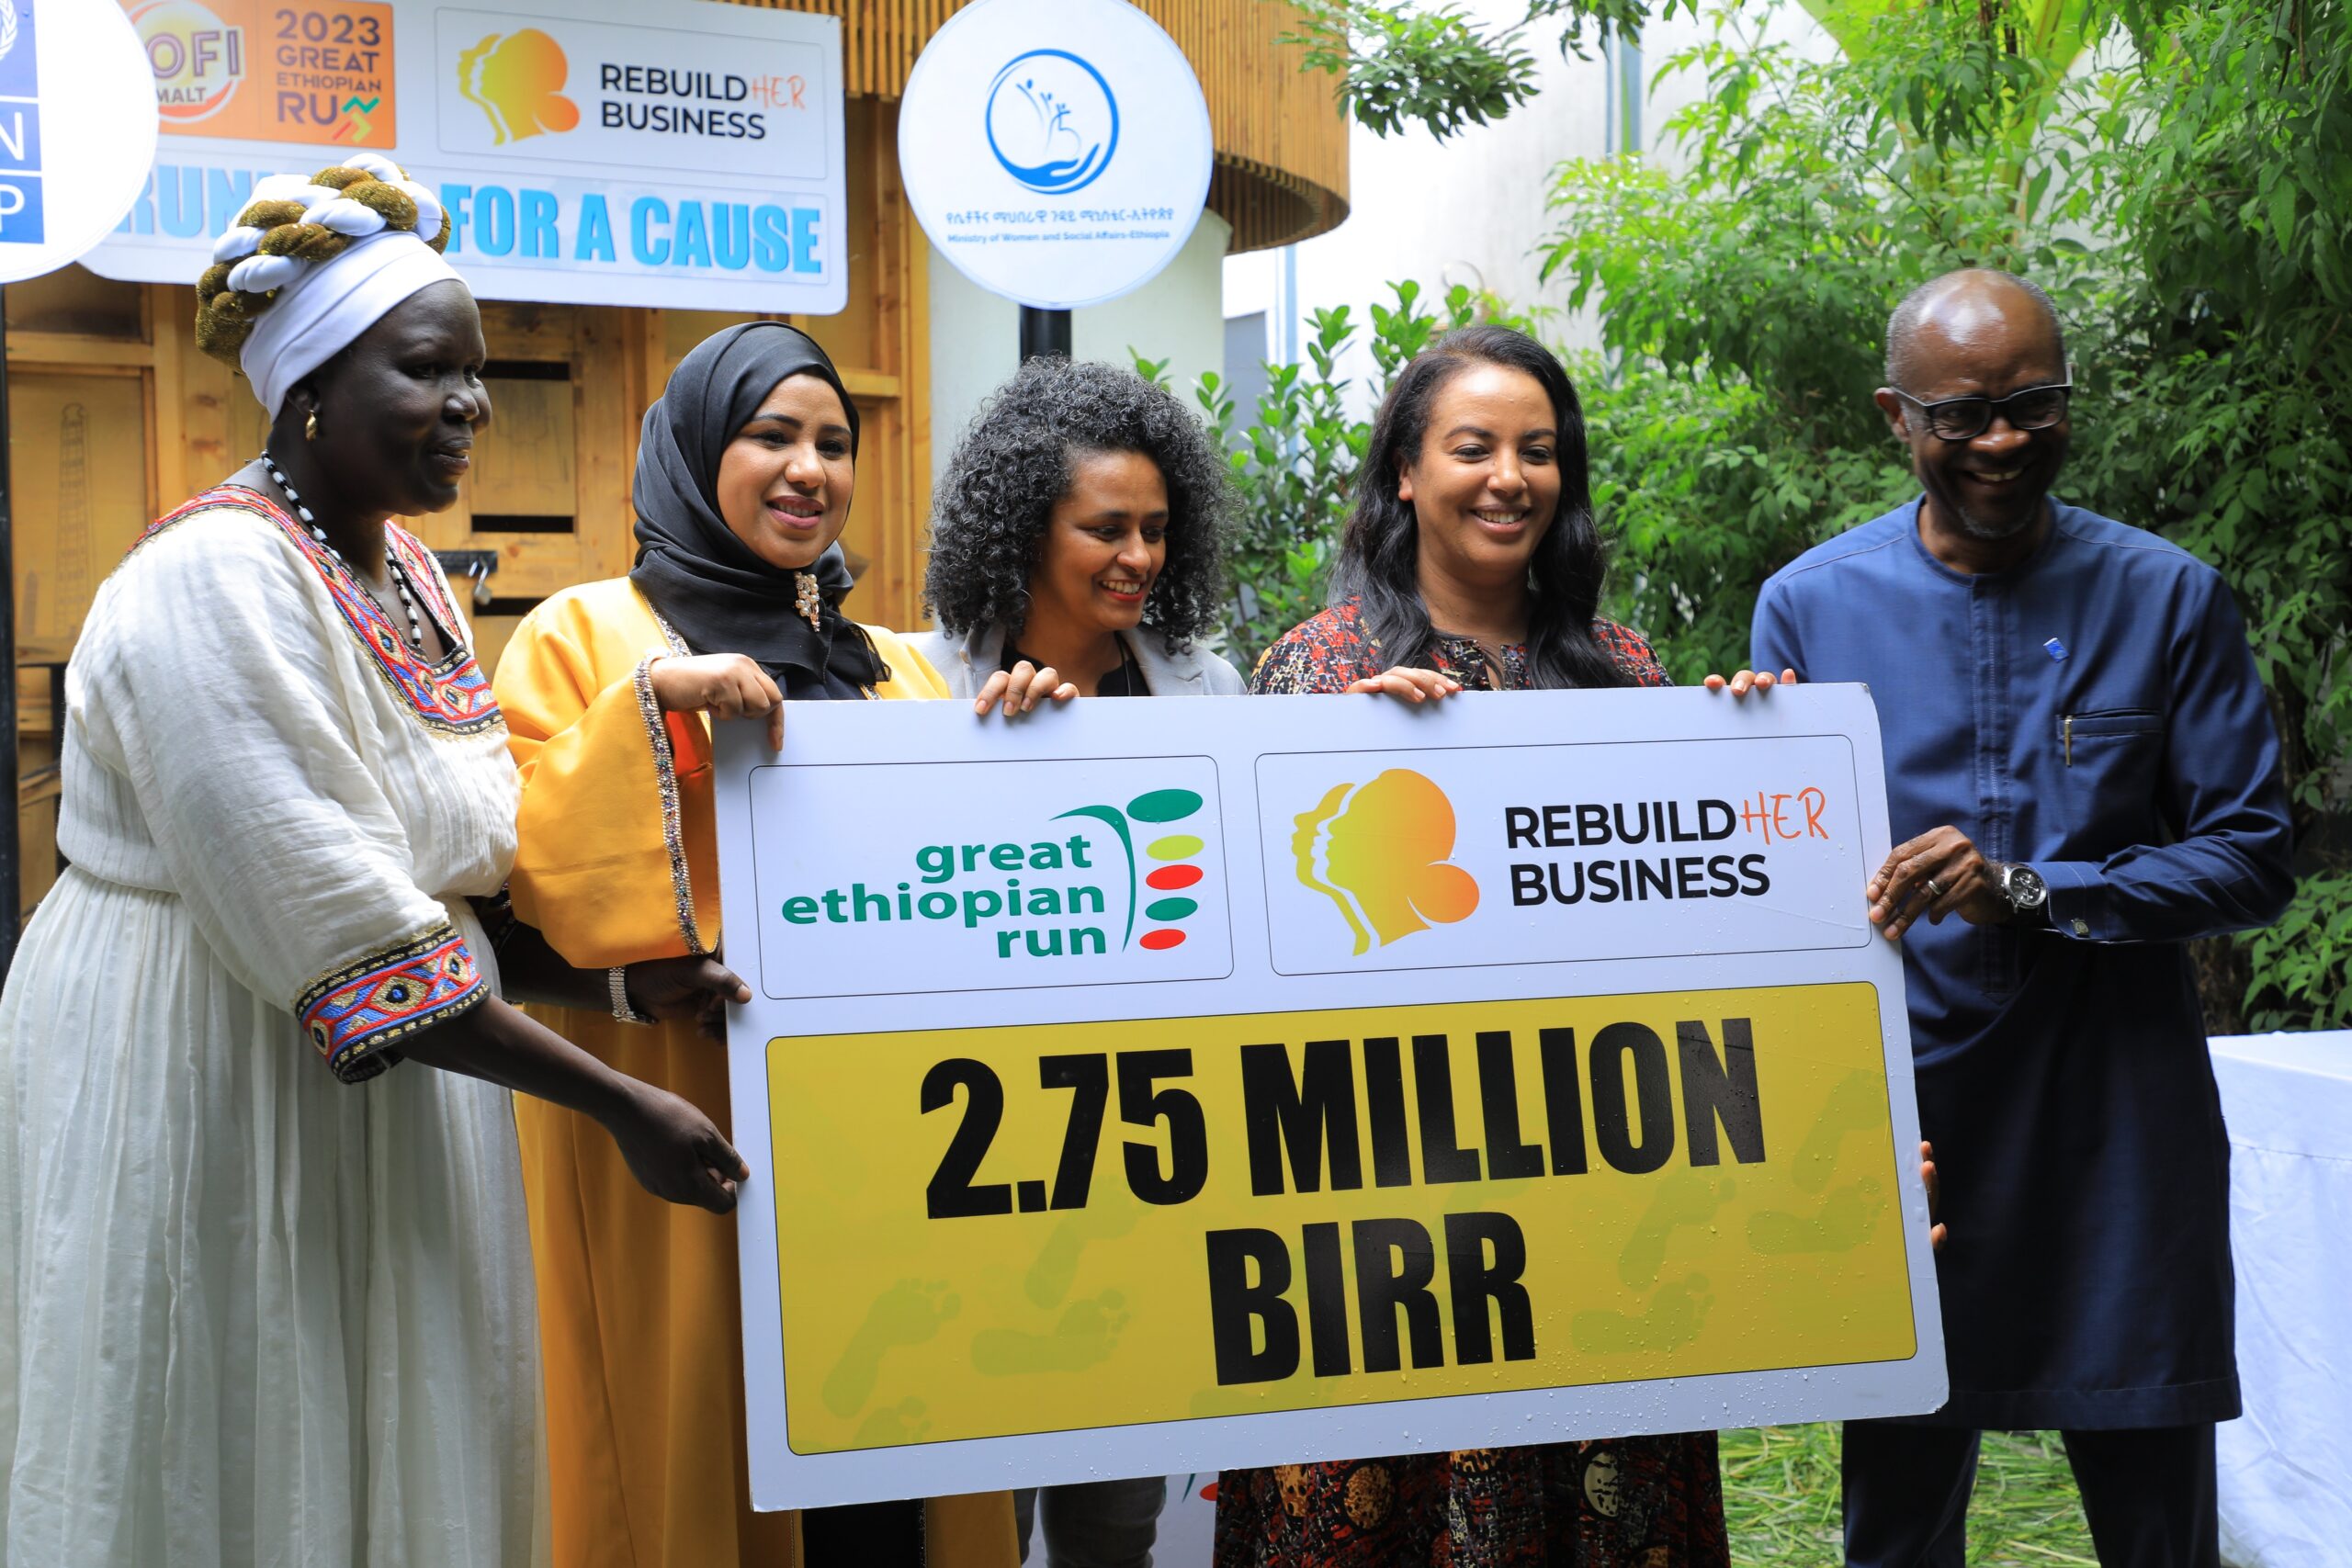 Rebuild Her Business – More than 750 female-led businesses to benefit in northern Ethiopia